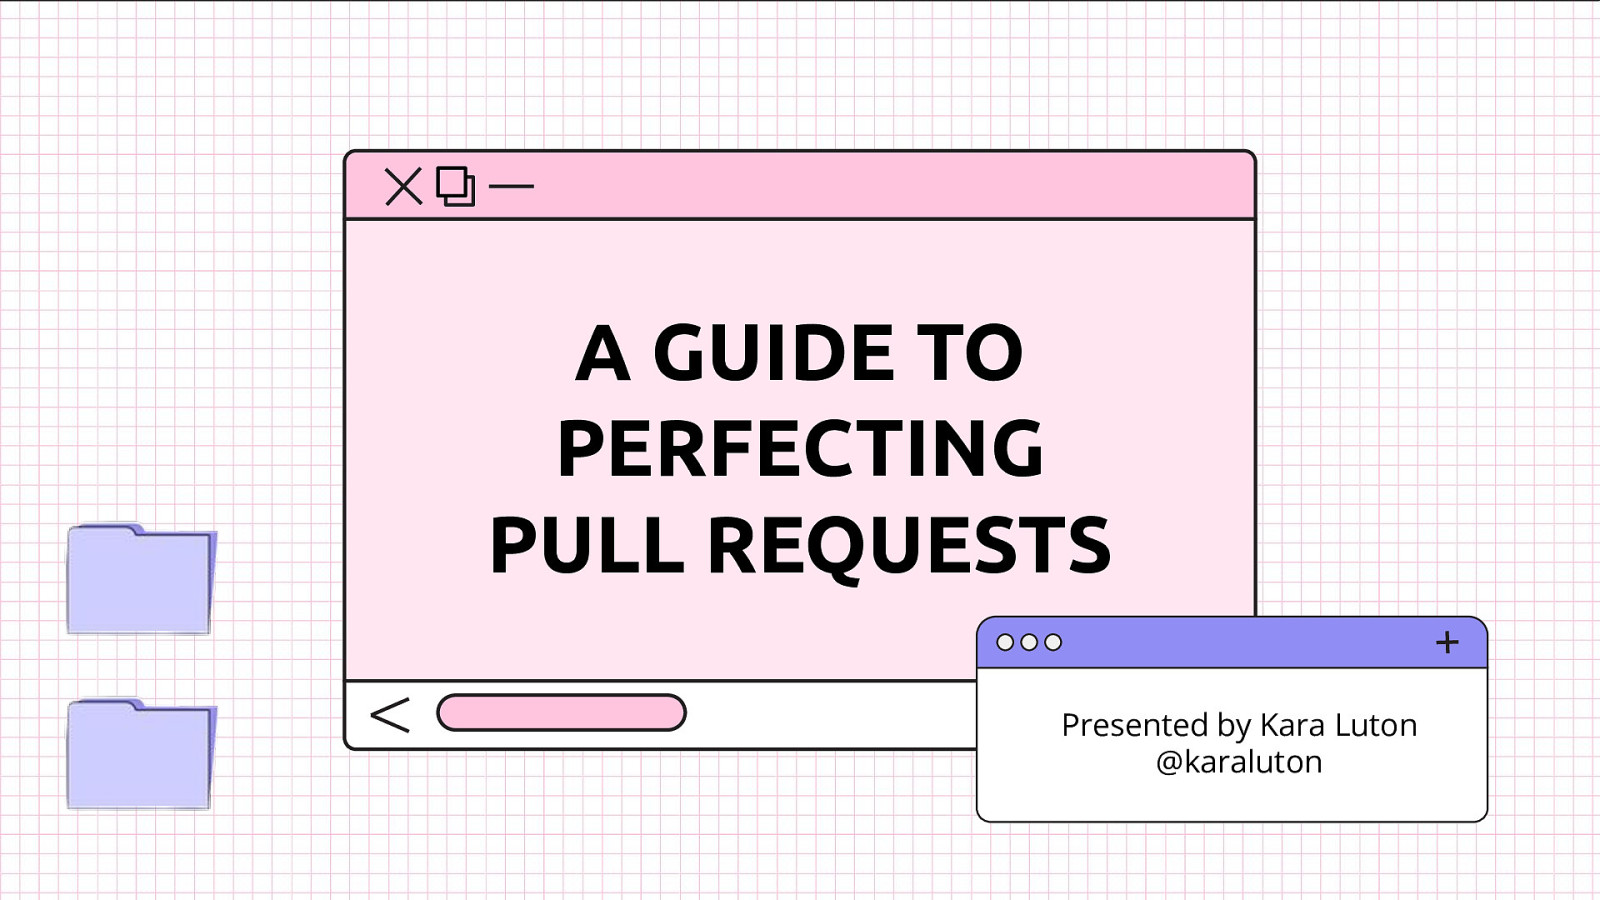 A Guide to Perfecting Pull Requests